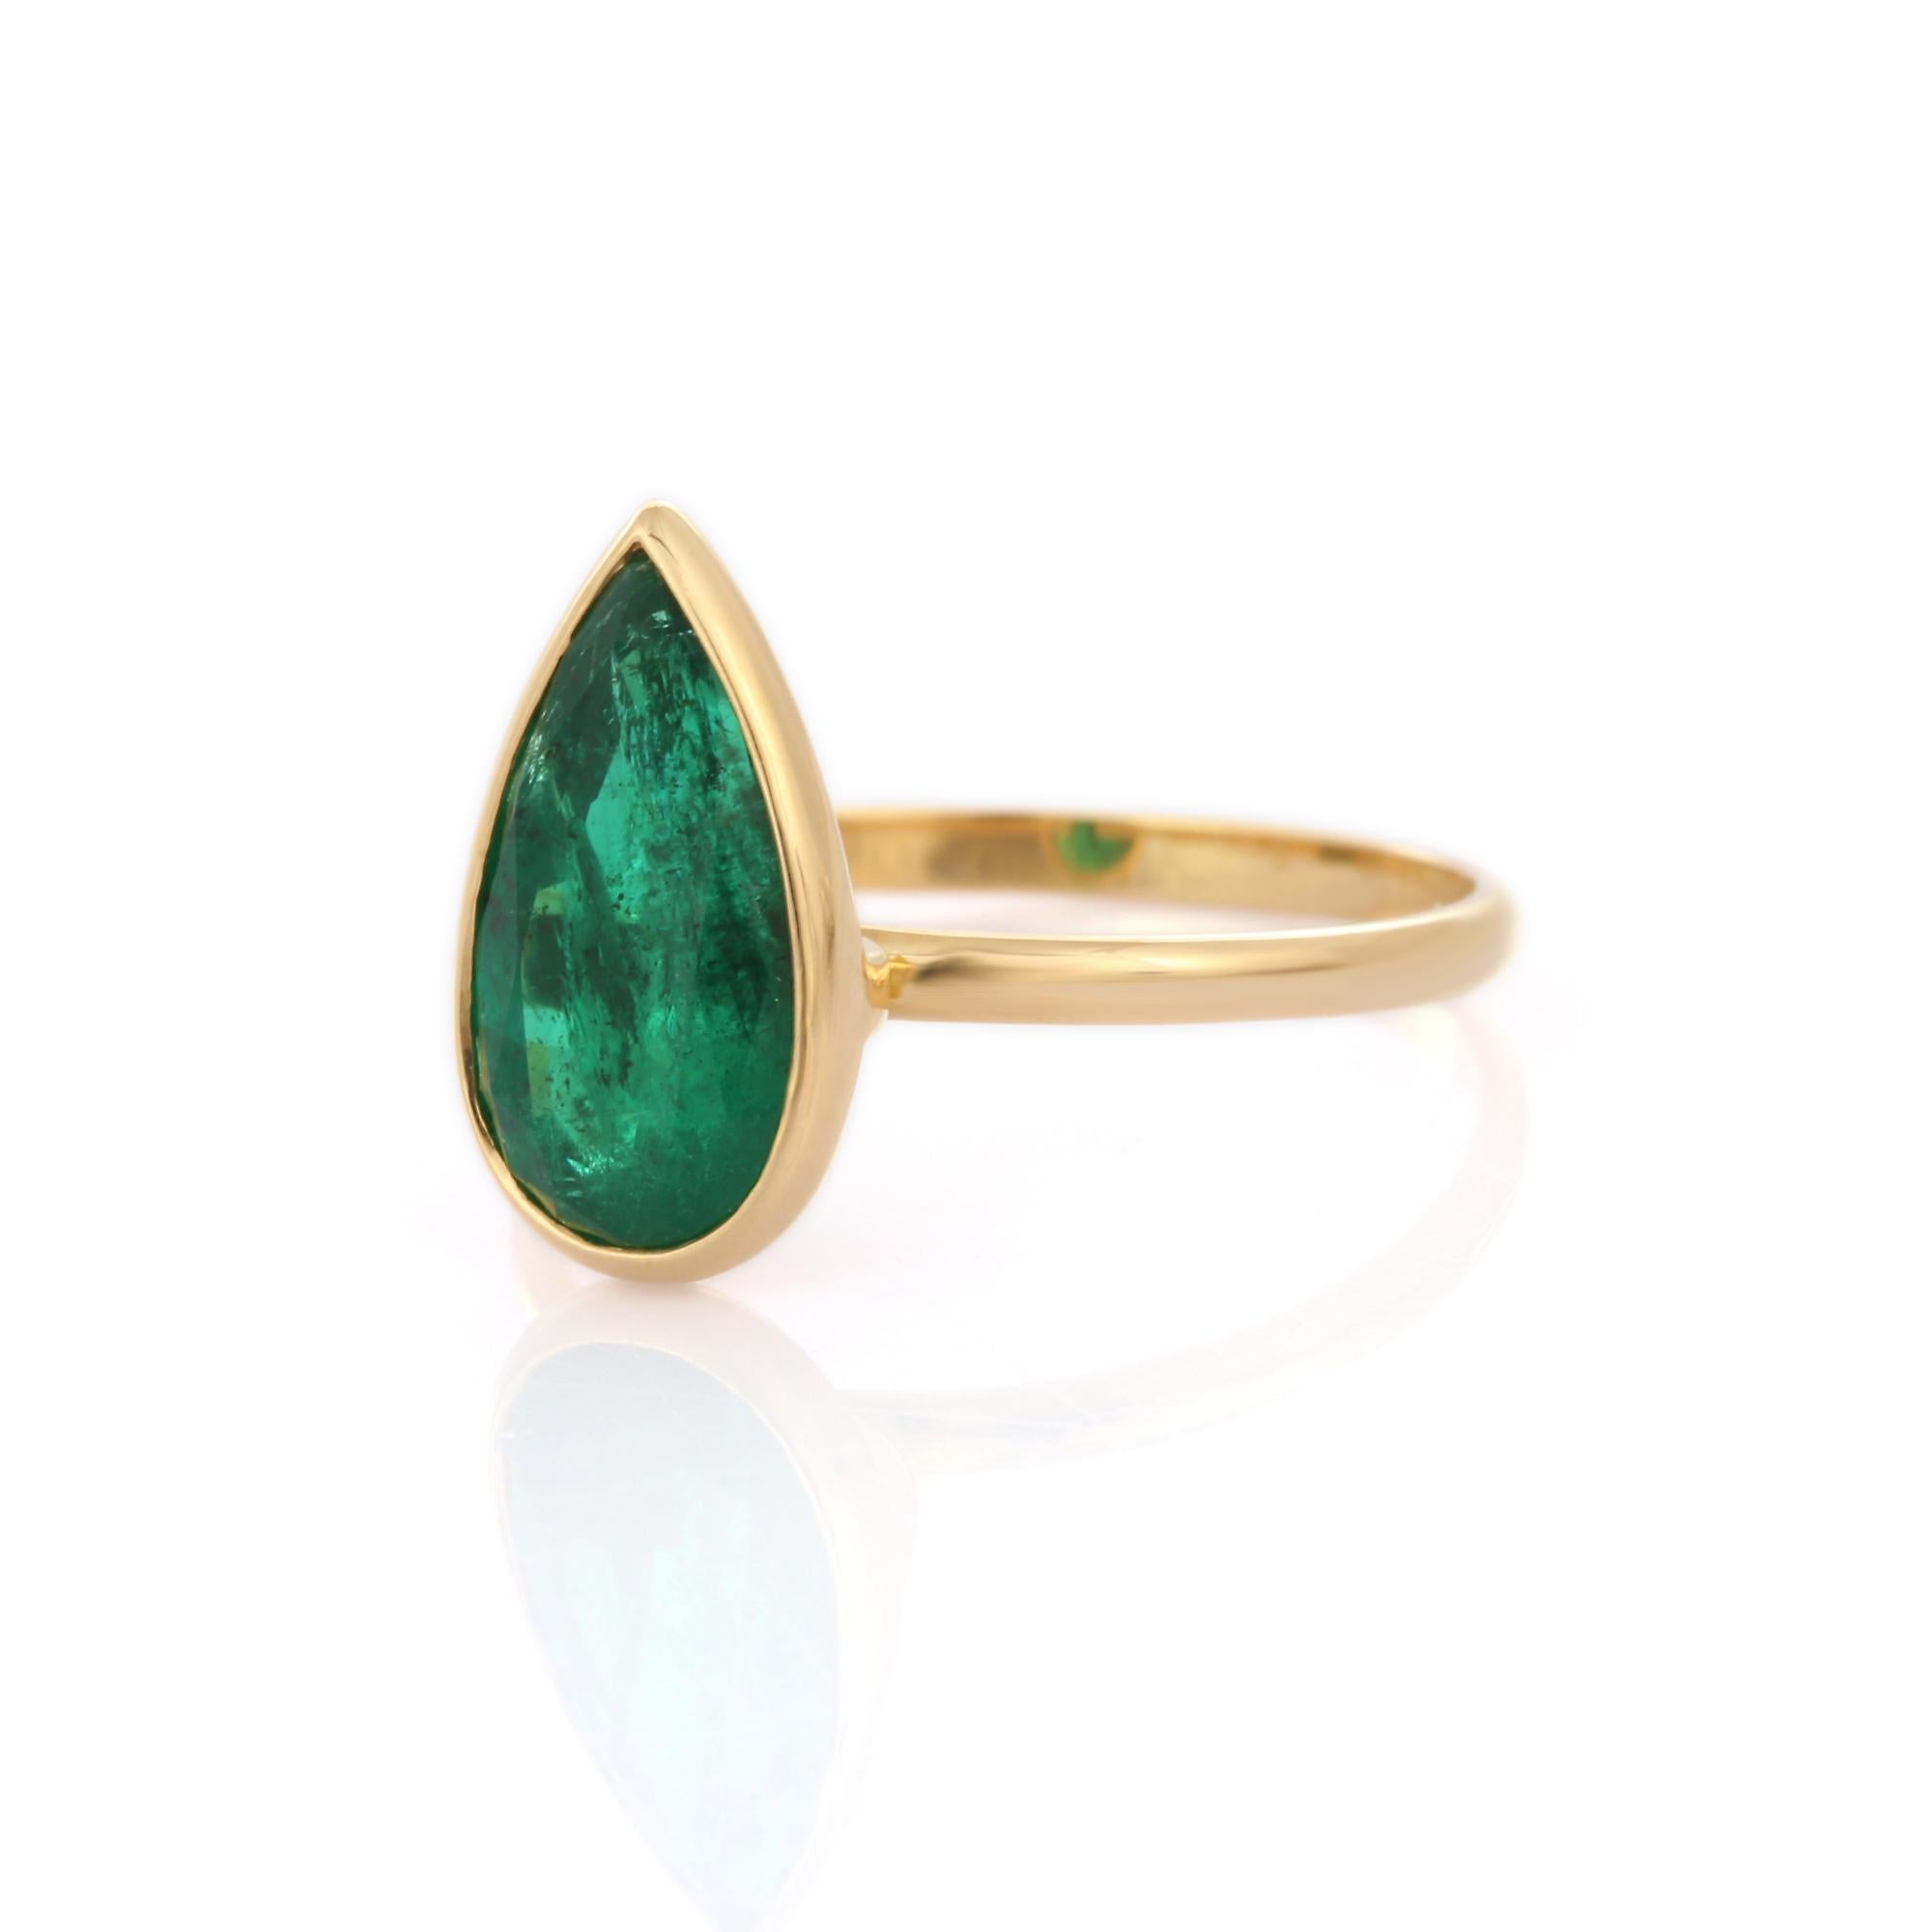 For Sale:  Enticing 2.9 ct Green Pear Cut Emerald Solitaire Wedding Ring in 18K Yellow Gold 3